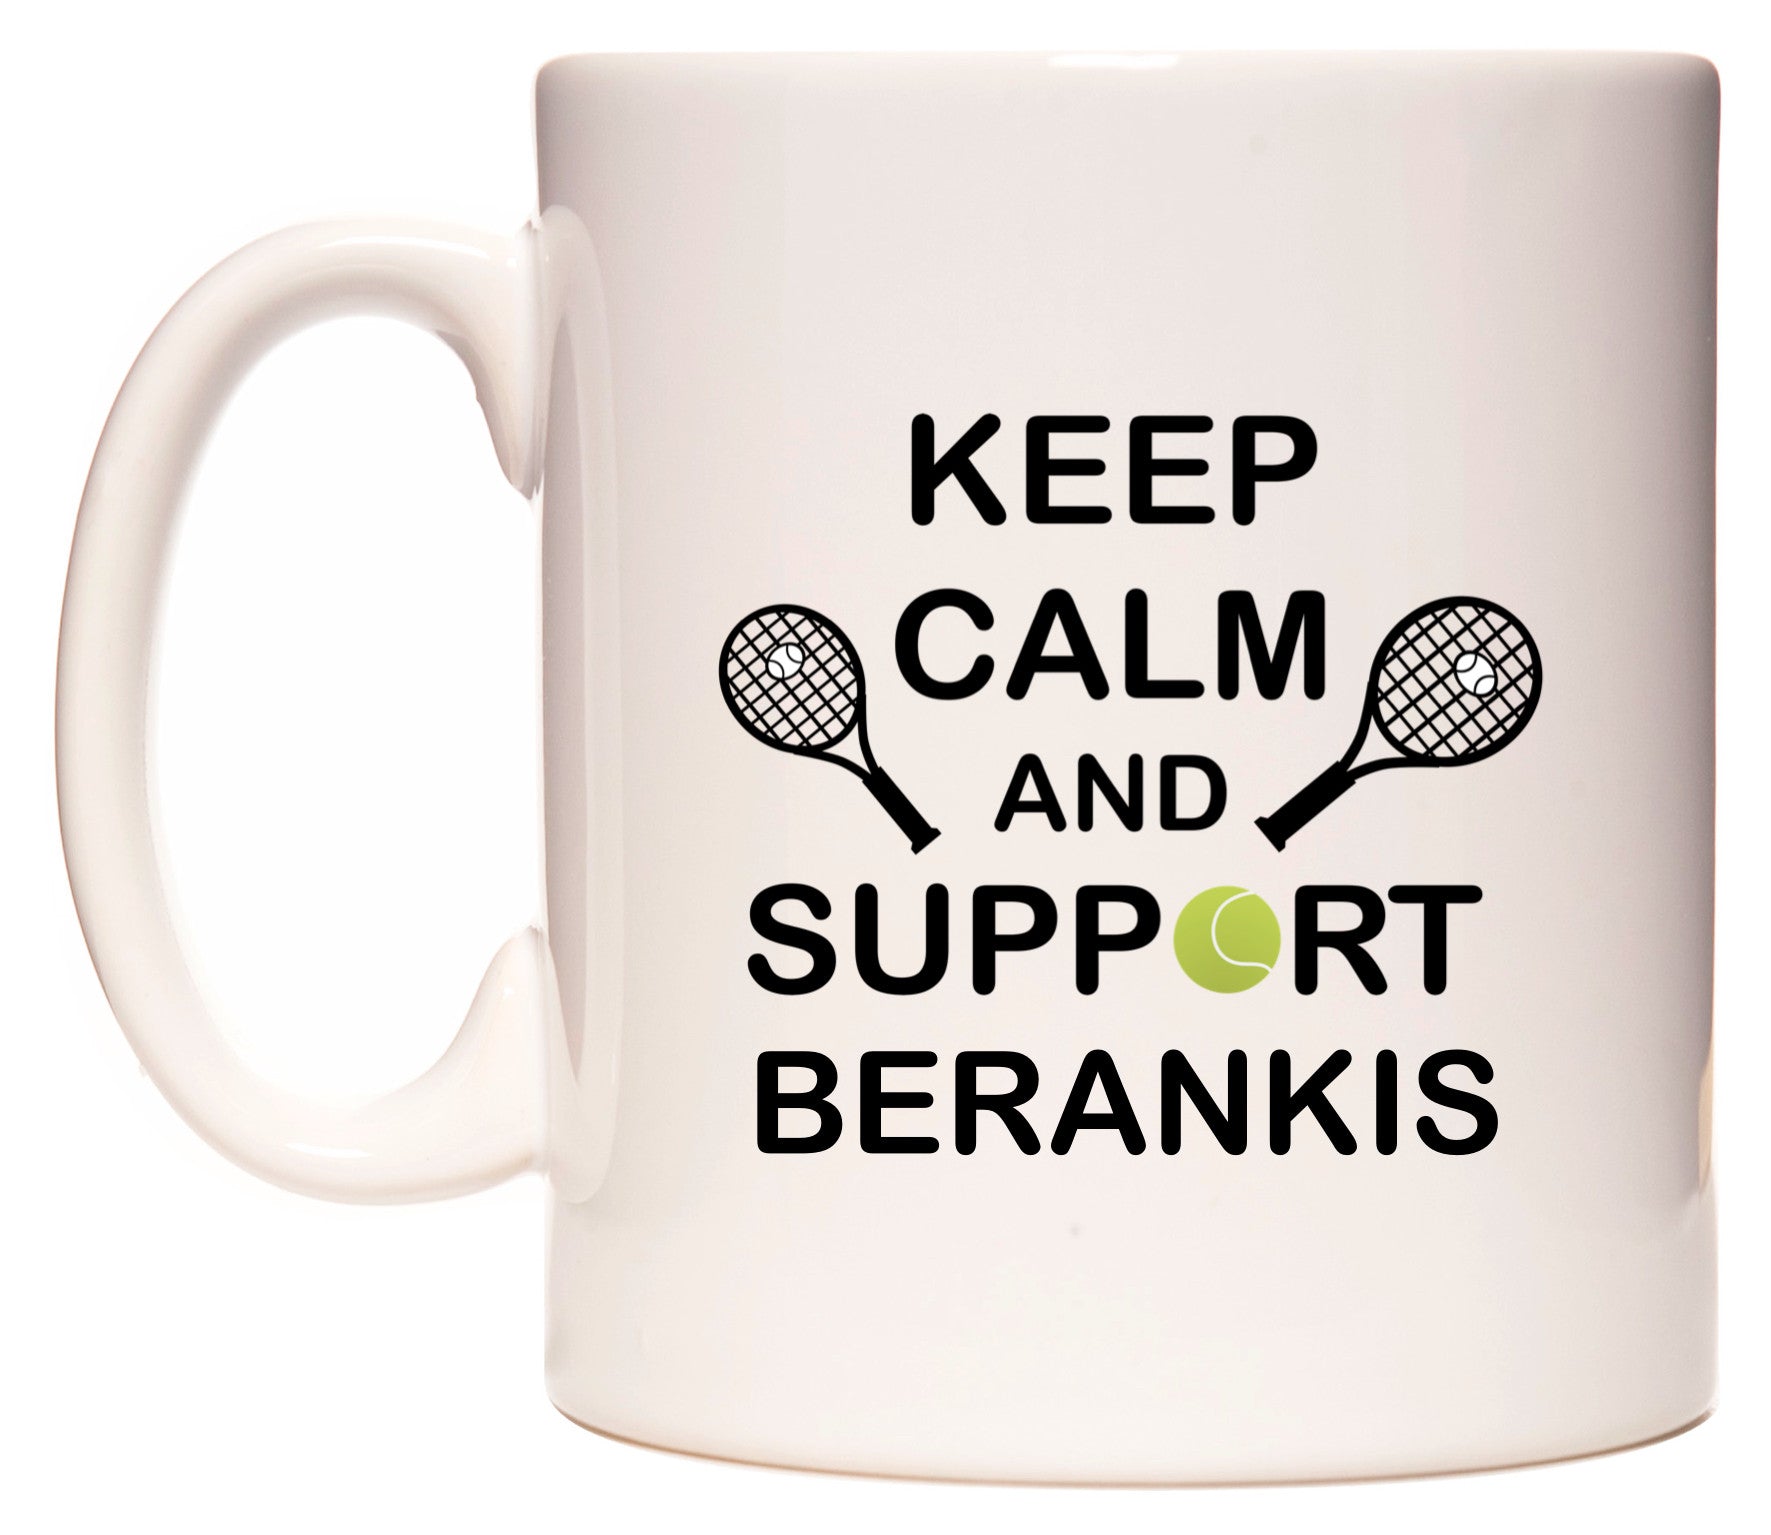 This mug features Keep Calm And Support Berankis